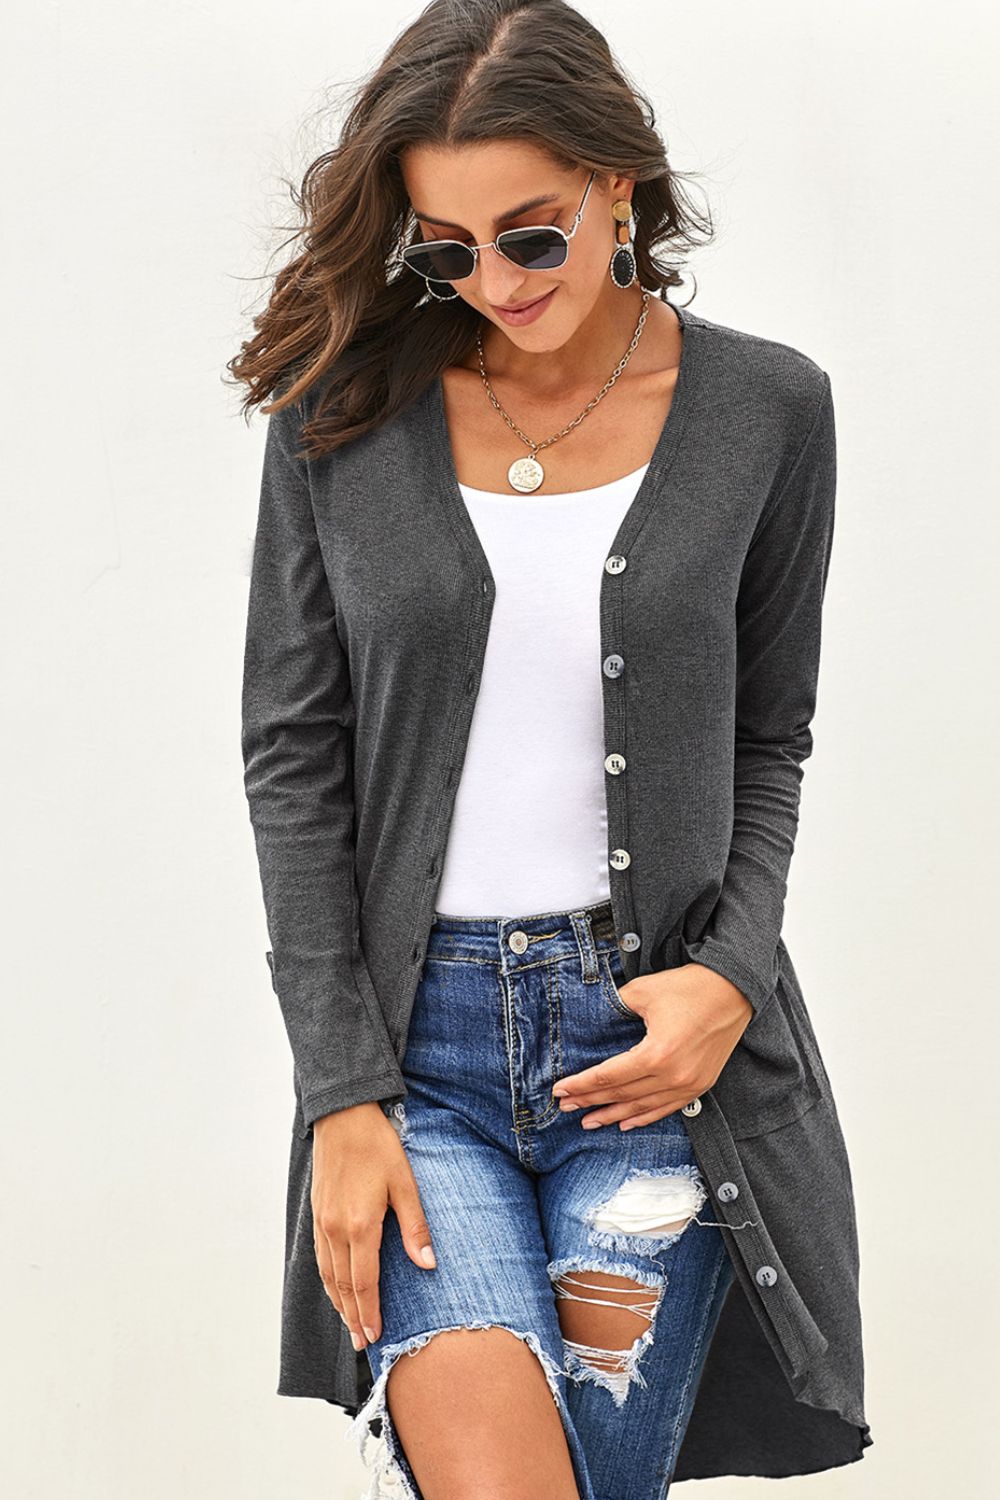 V-Neck Long Sleeve Cardigan with Pocket - Women’s Clothing & Accessories - Shirts & Tops - 4 - 2024